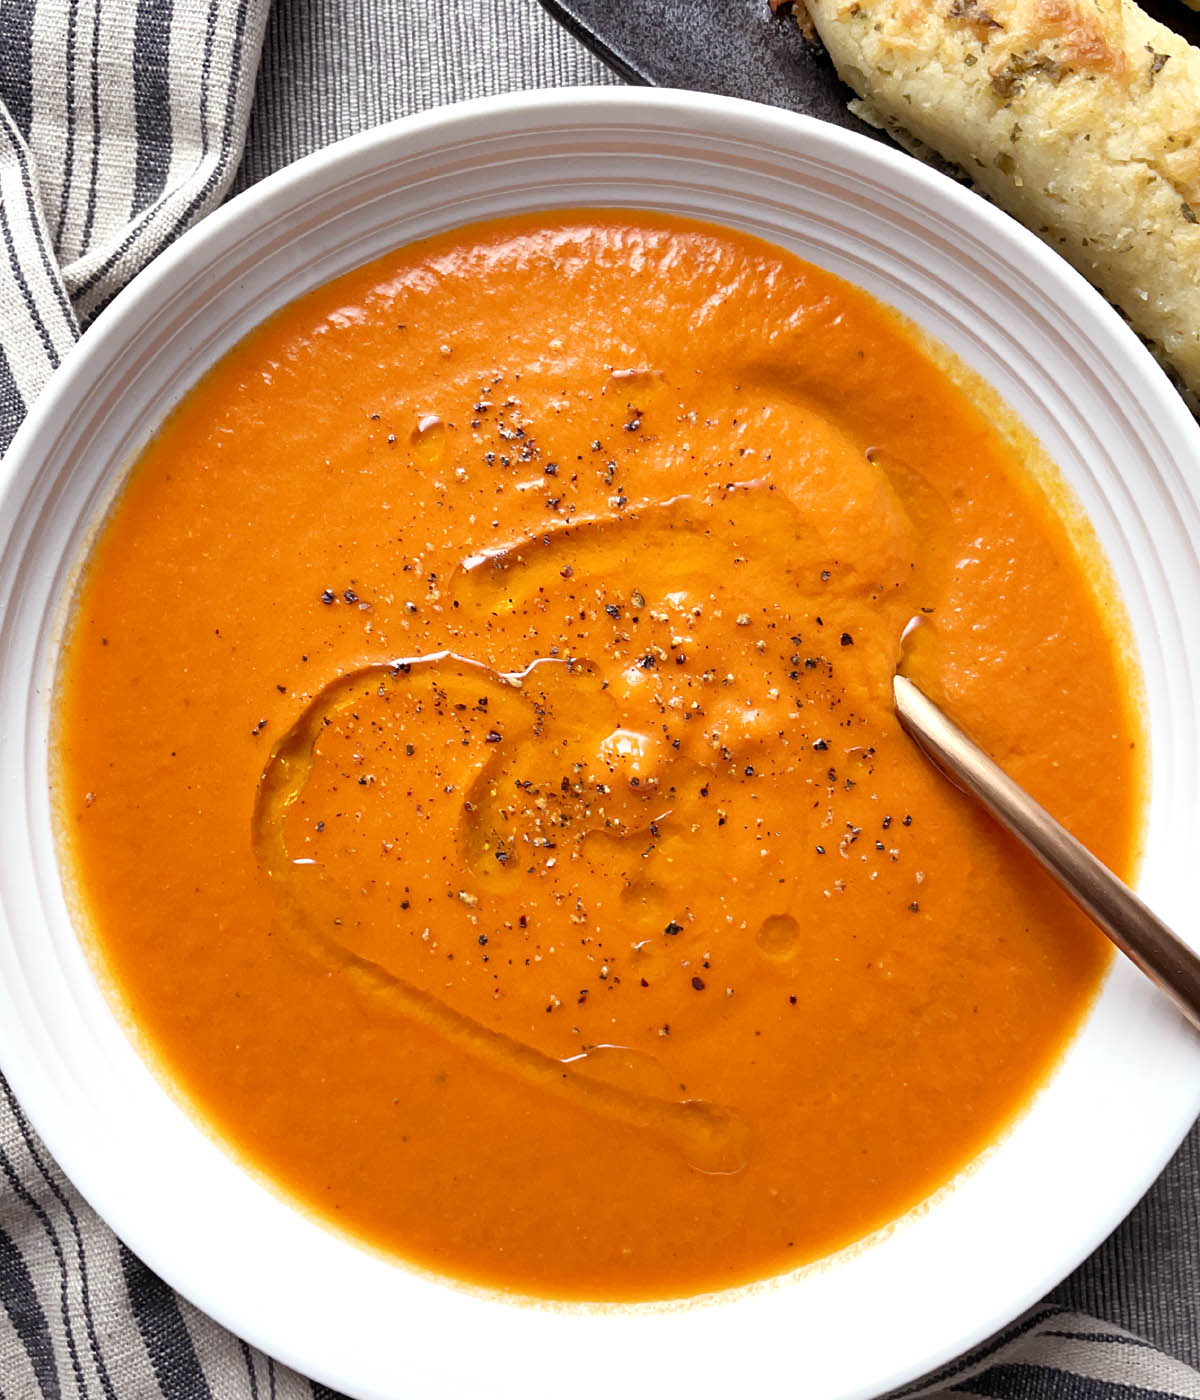 A round white bowl containing orange roasted tomato soup topped with a drizzle of oil and cracked black pepper.